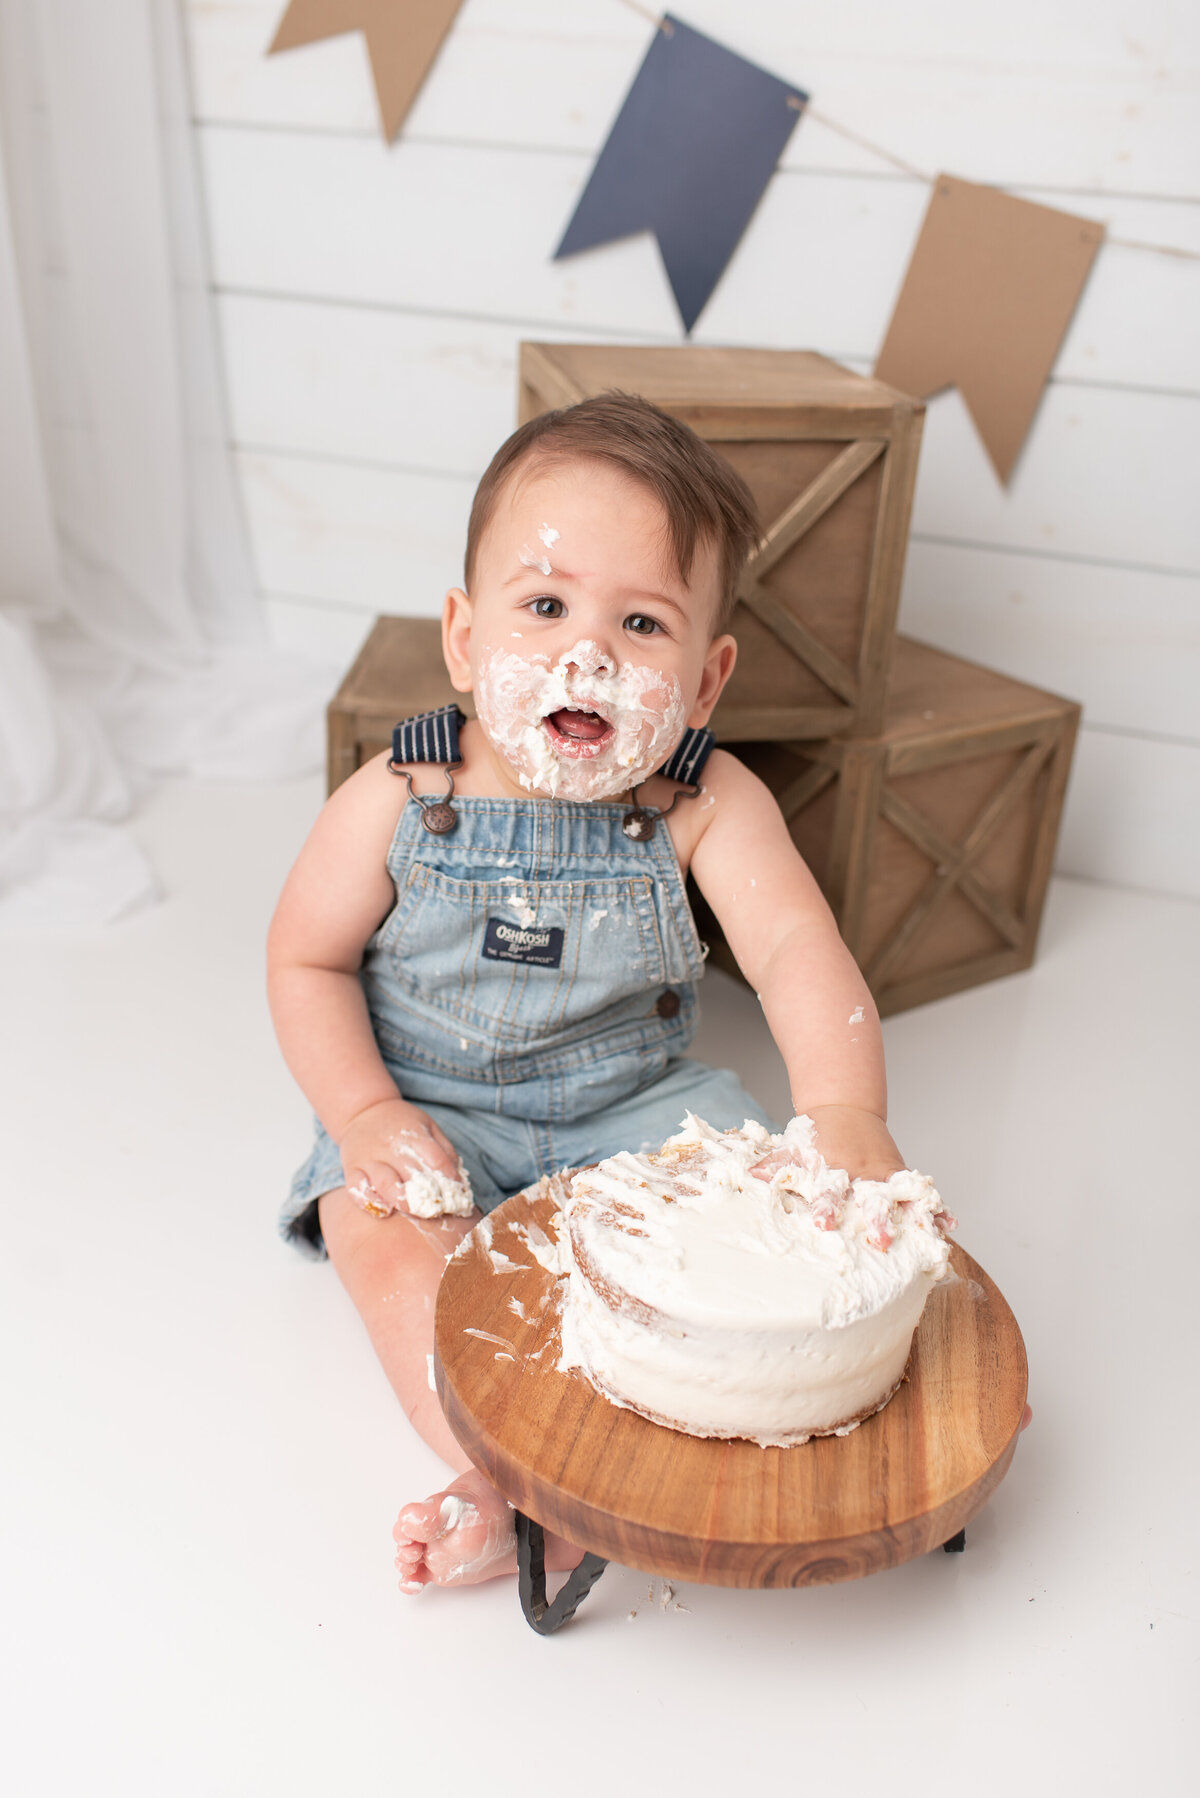 Baby smiling at camera with cake all over his face